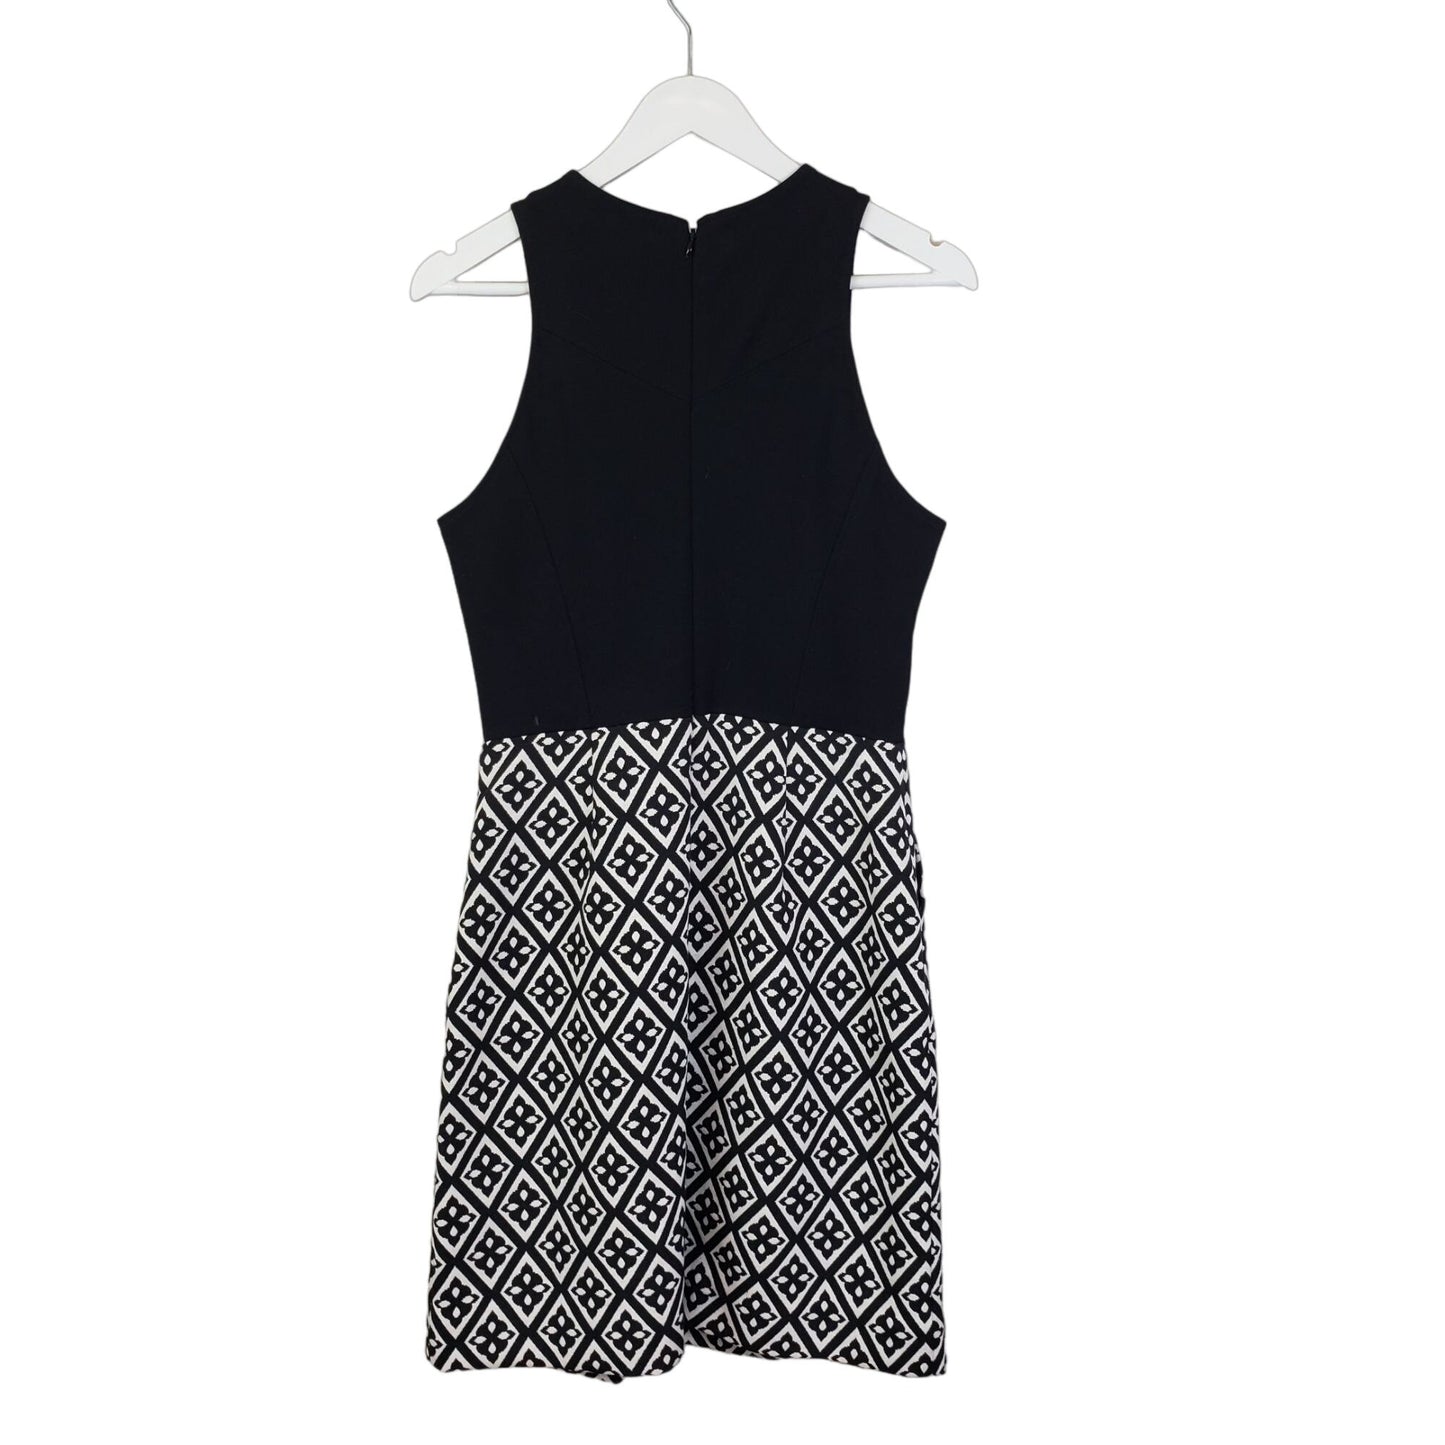 Lucky Brand Jacquard Fit & Flare Dress Size 4